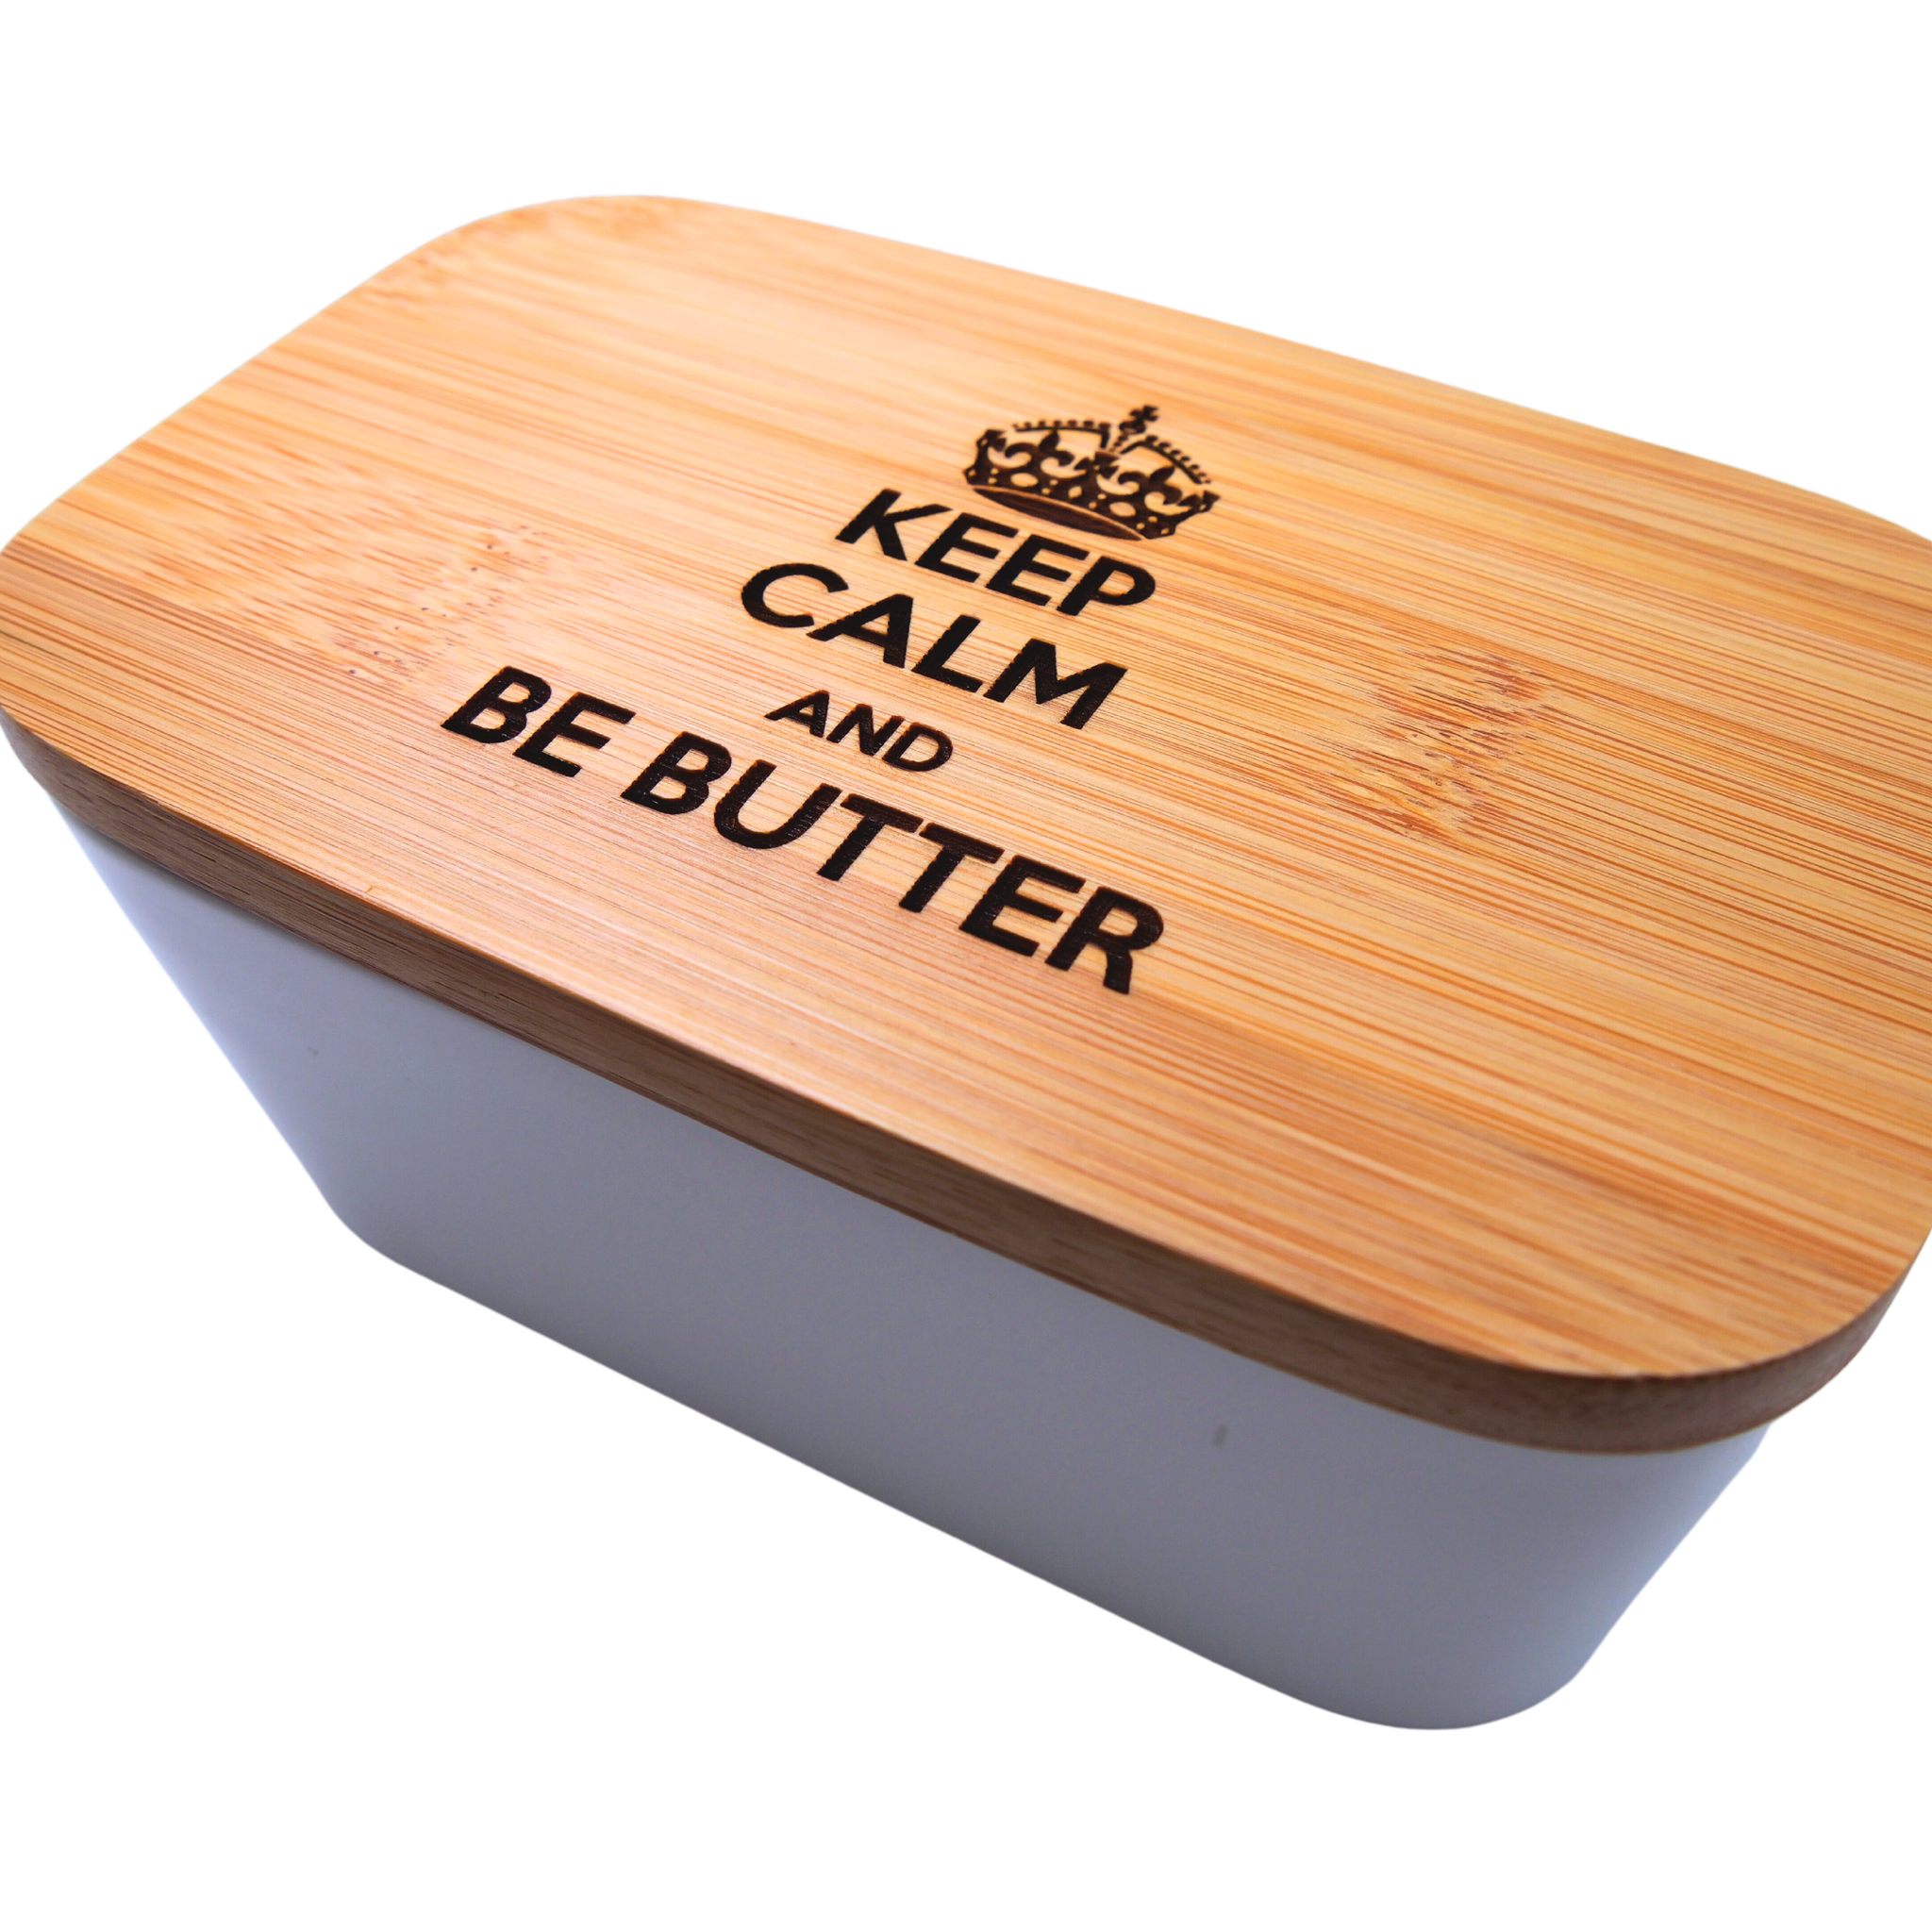 Keep Calm and Be Butter Ceramic White Butter Dish